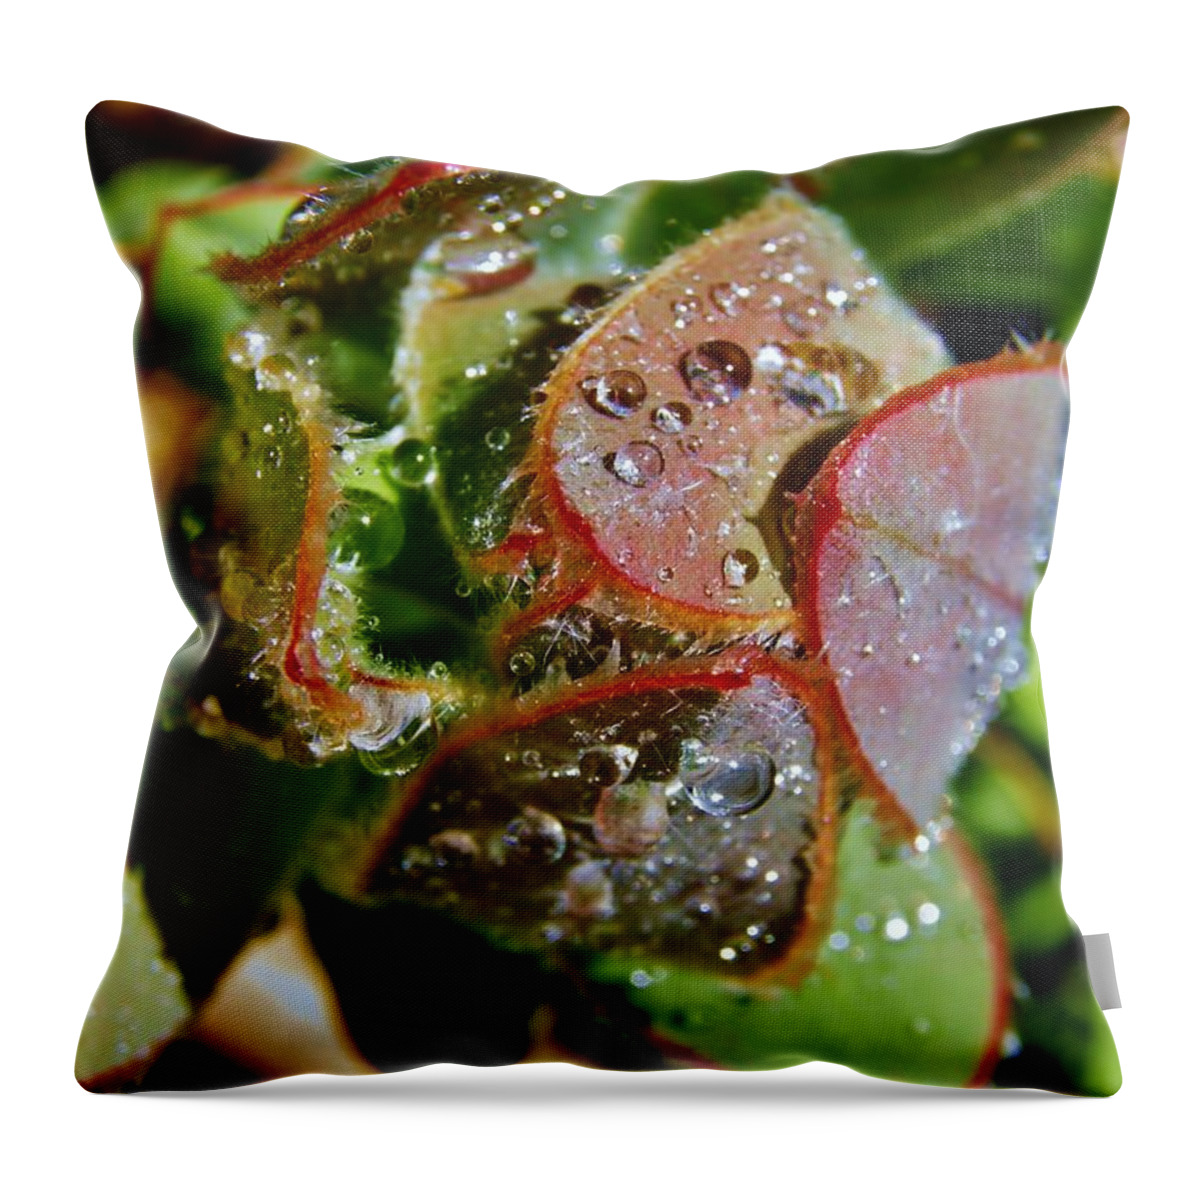 Green; Plant; Garden; Macro; Nature; Leaf; Brown; Beige; Water Spring; Wet; Red; Common Pincushion; Raindrops; Sunlight; Background; Decorative; Throw Pillow featuring the photograph Raindrops on leaf #1 by Werner Lehmann